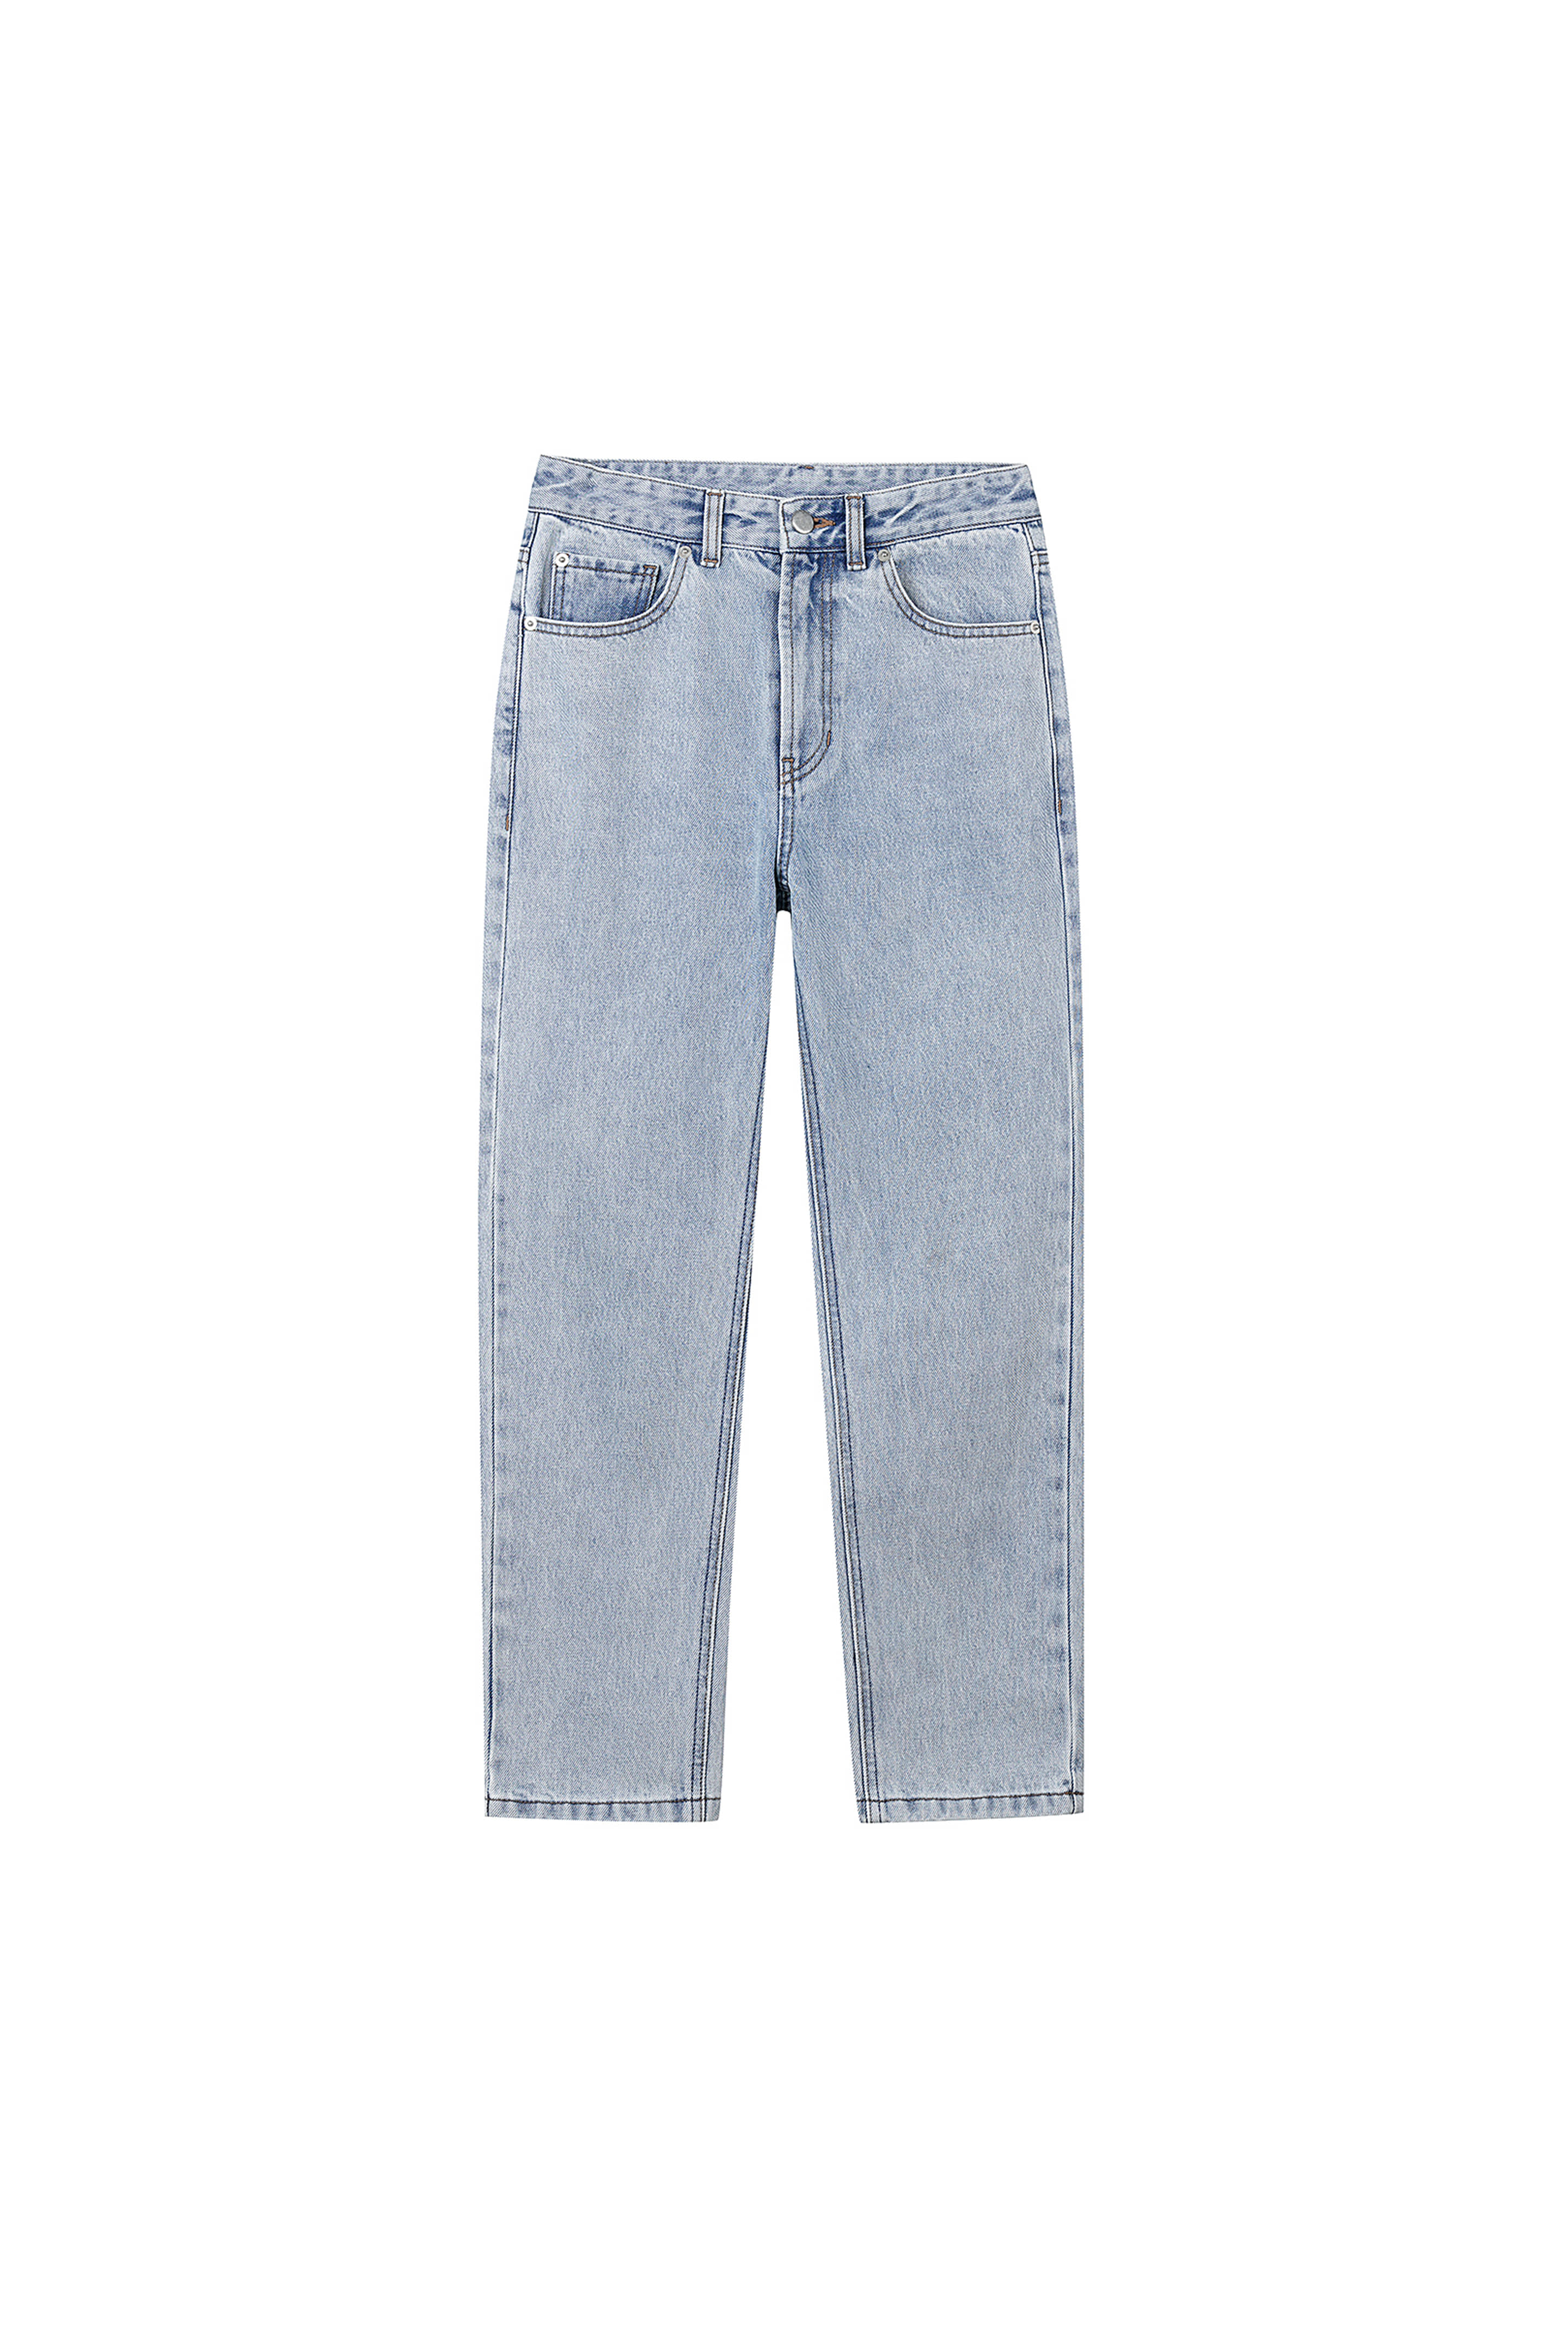 4th) Midrise Cropped Jeans Hand Brushed L.Blue